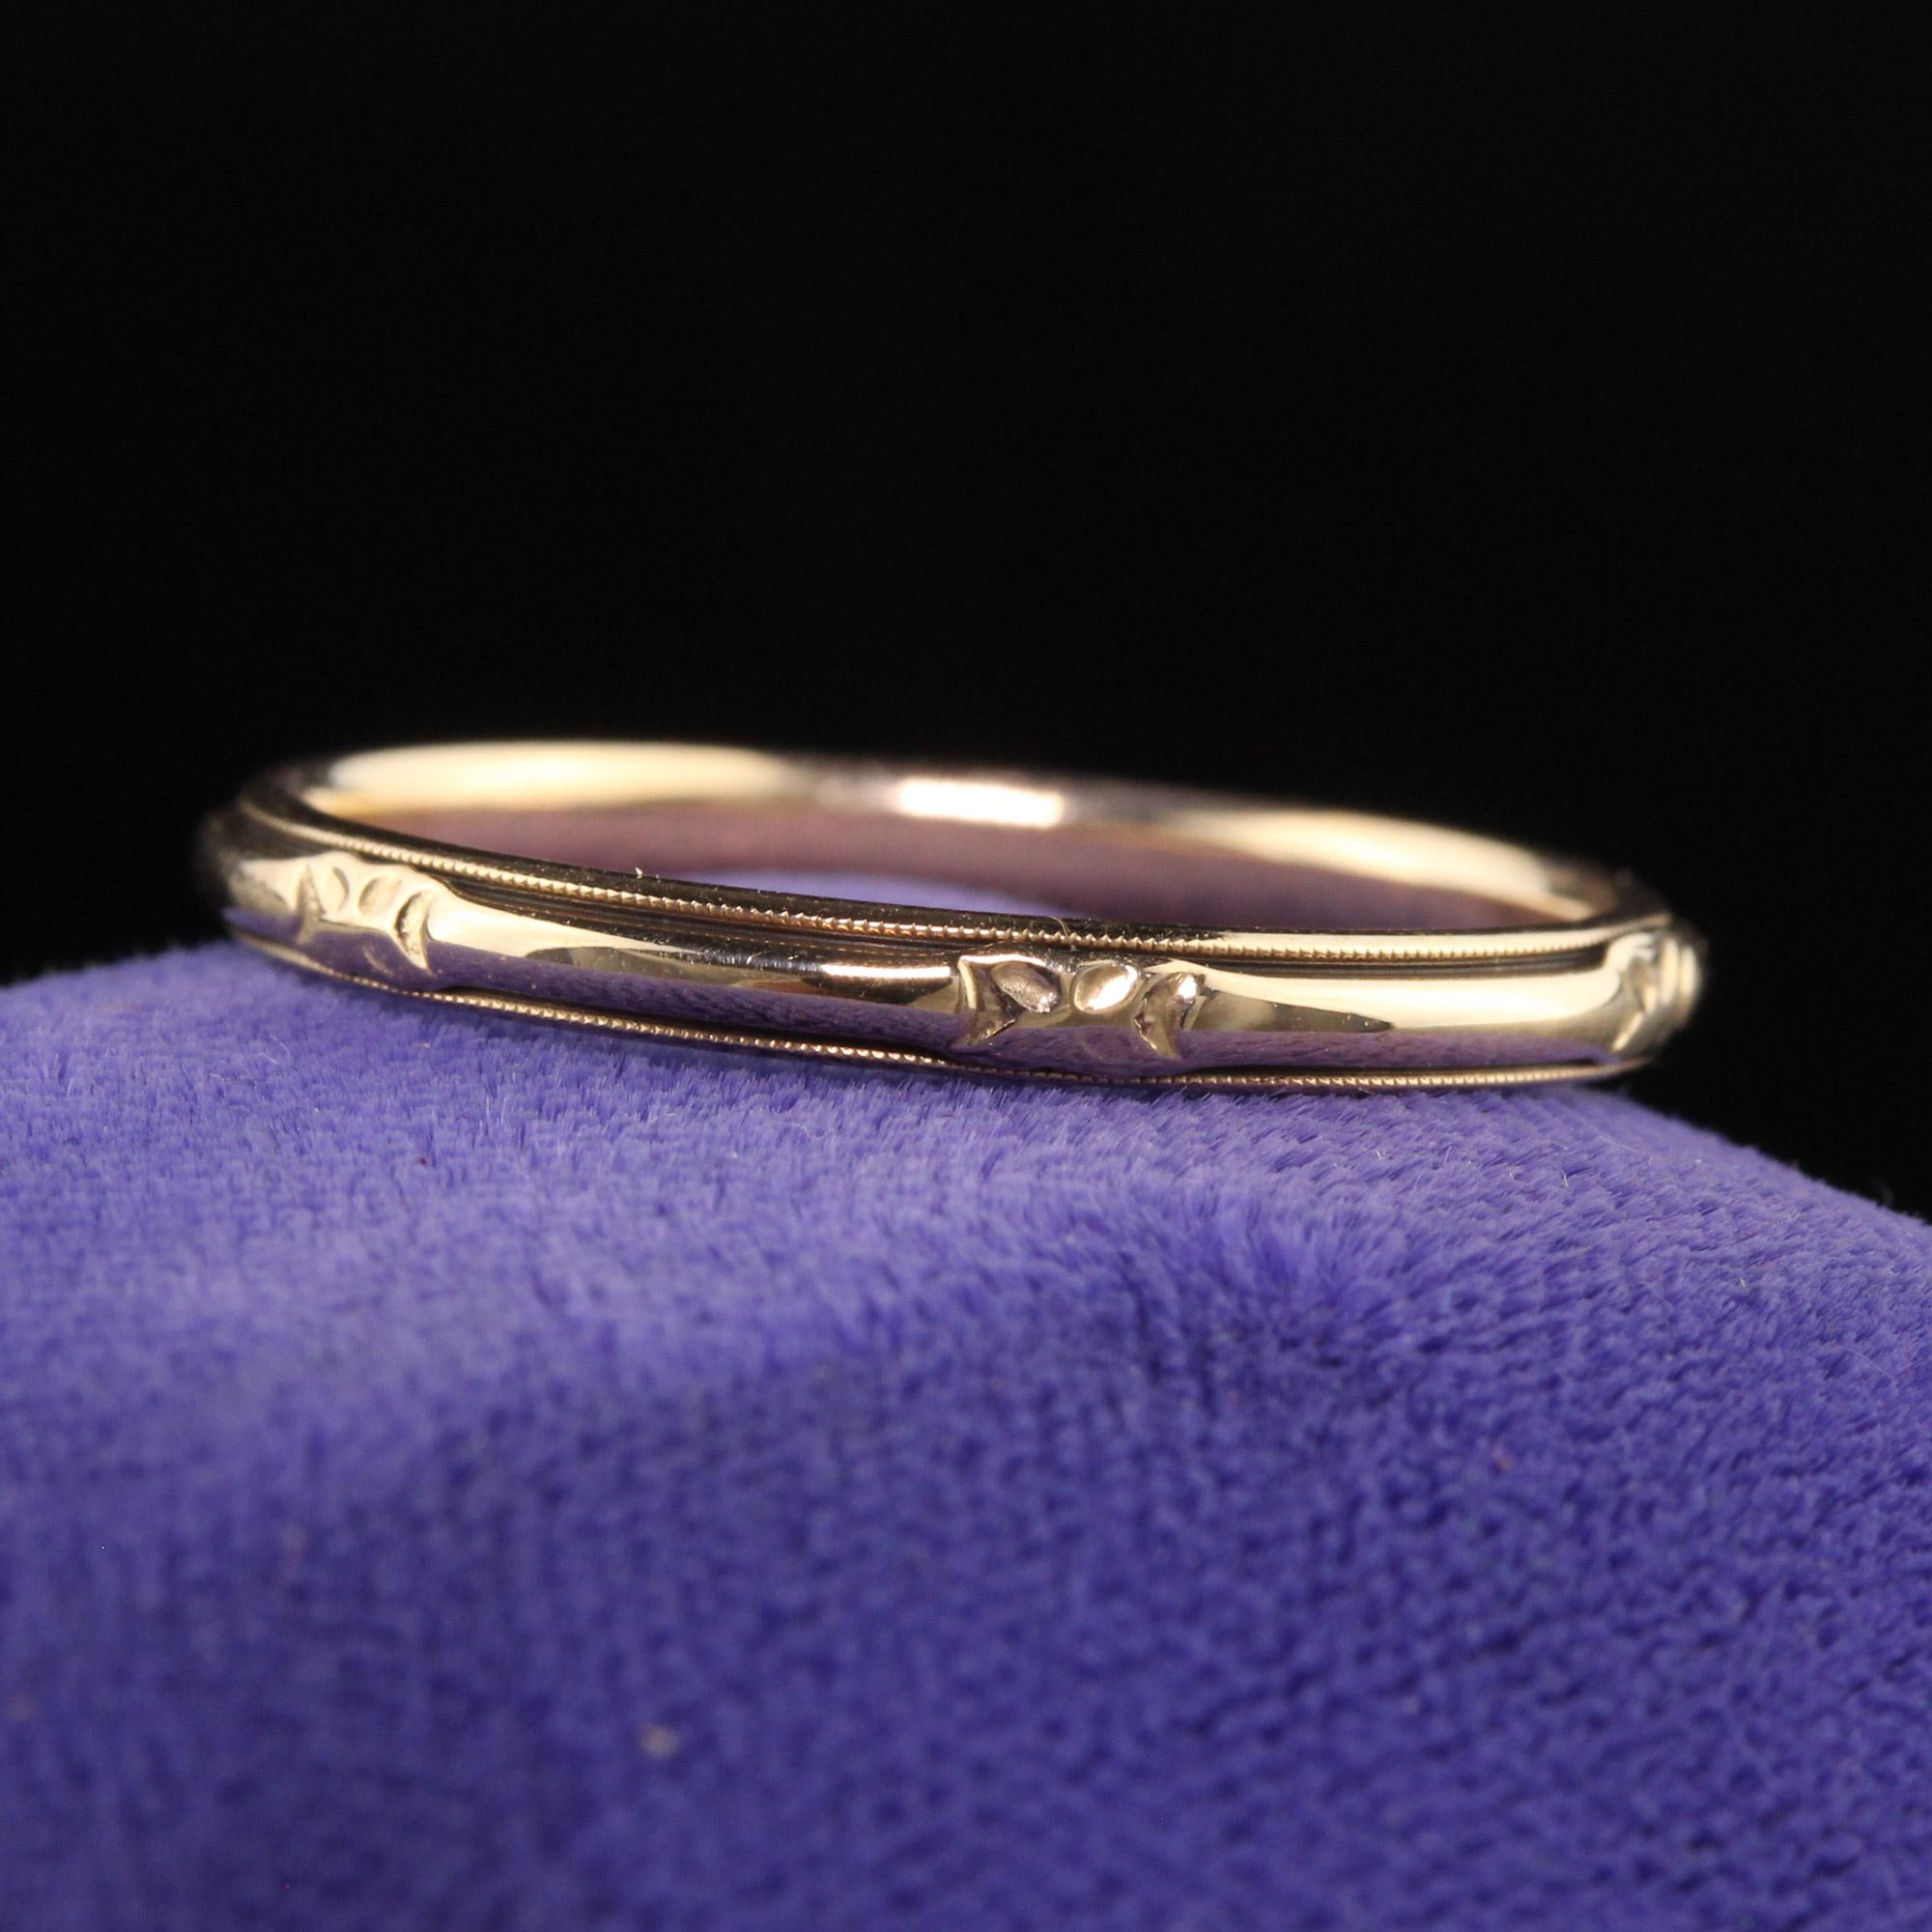 Beautiful Antique Art Deco Wood and Sons 14K Yellow Gold Engraved Wedding Band. This classic Art Deco wedding band is crafted in 14K yellow gold and has beautiful engravings around the entire band.

Item #R1134

Metal: 14K Yellow Gold

Weight: 1.9